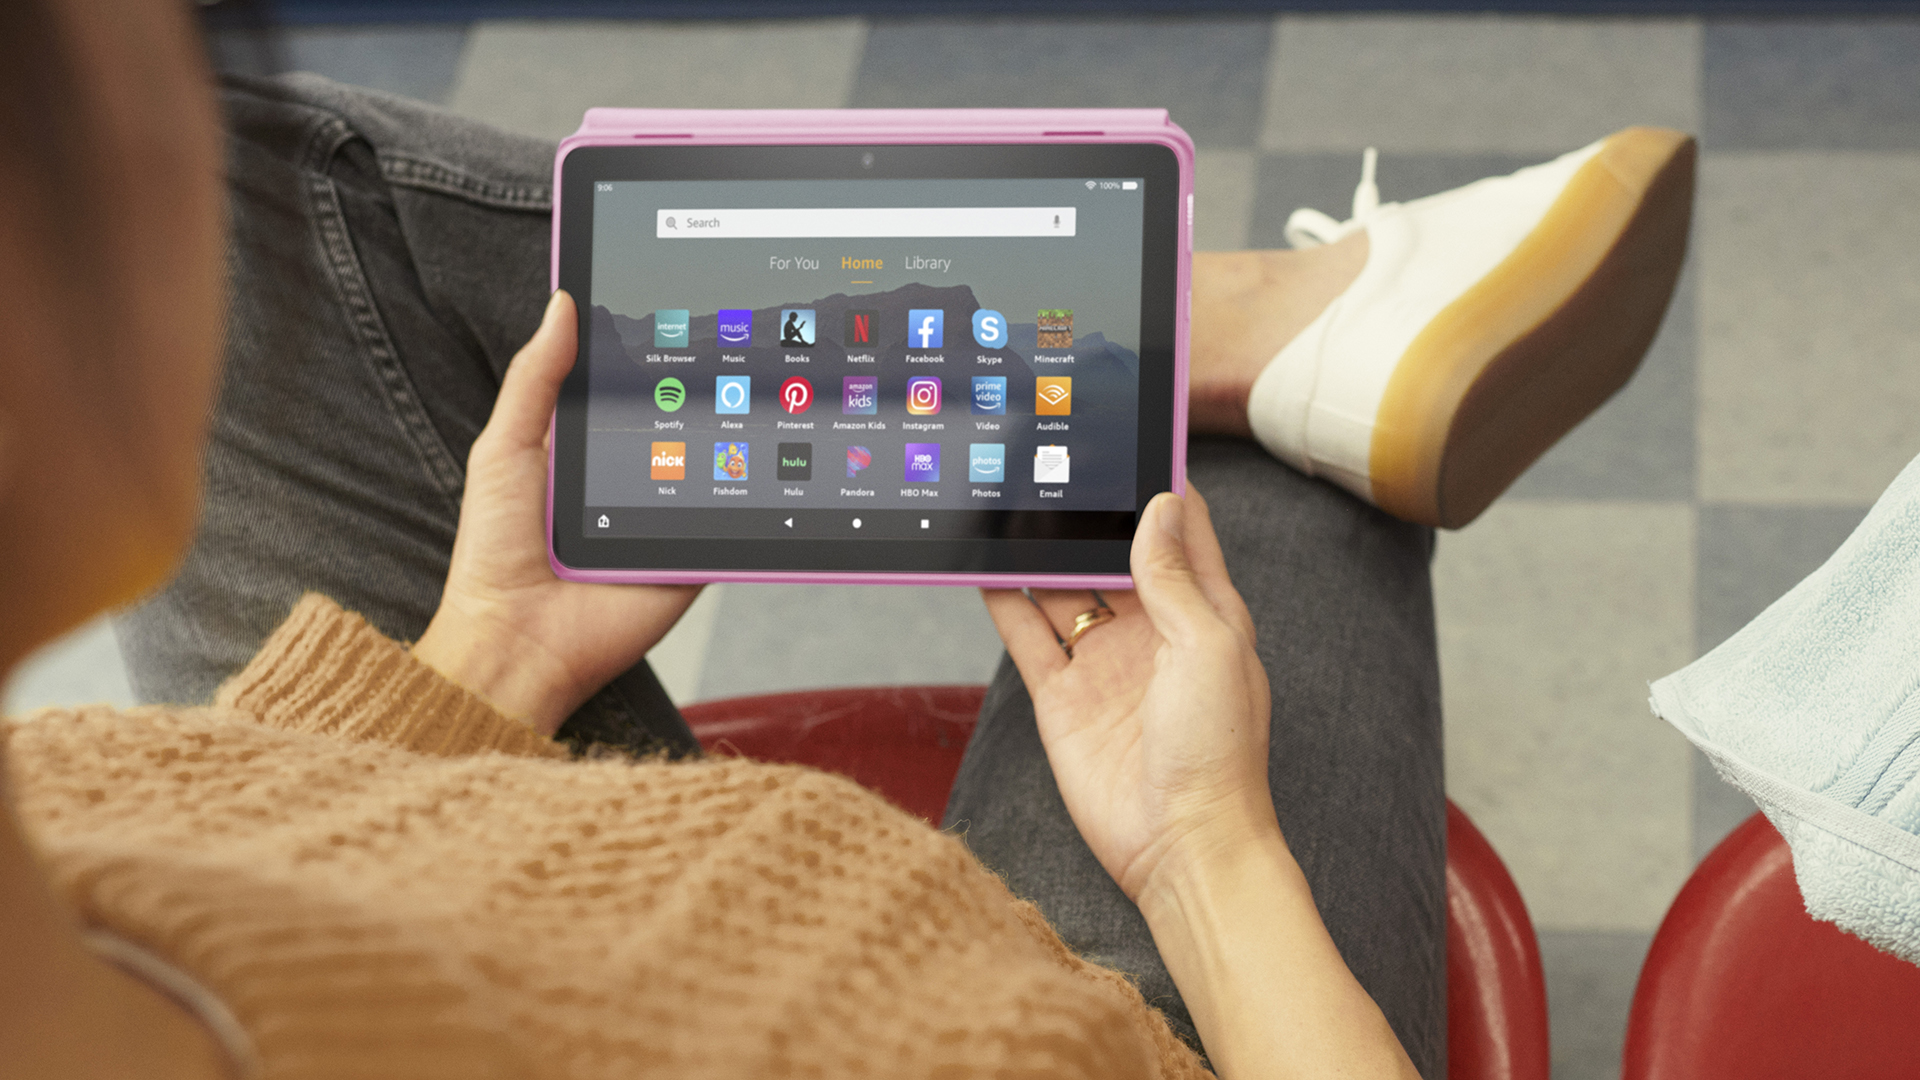 Amazon Fire HD 8 2022 in persons lap